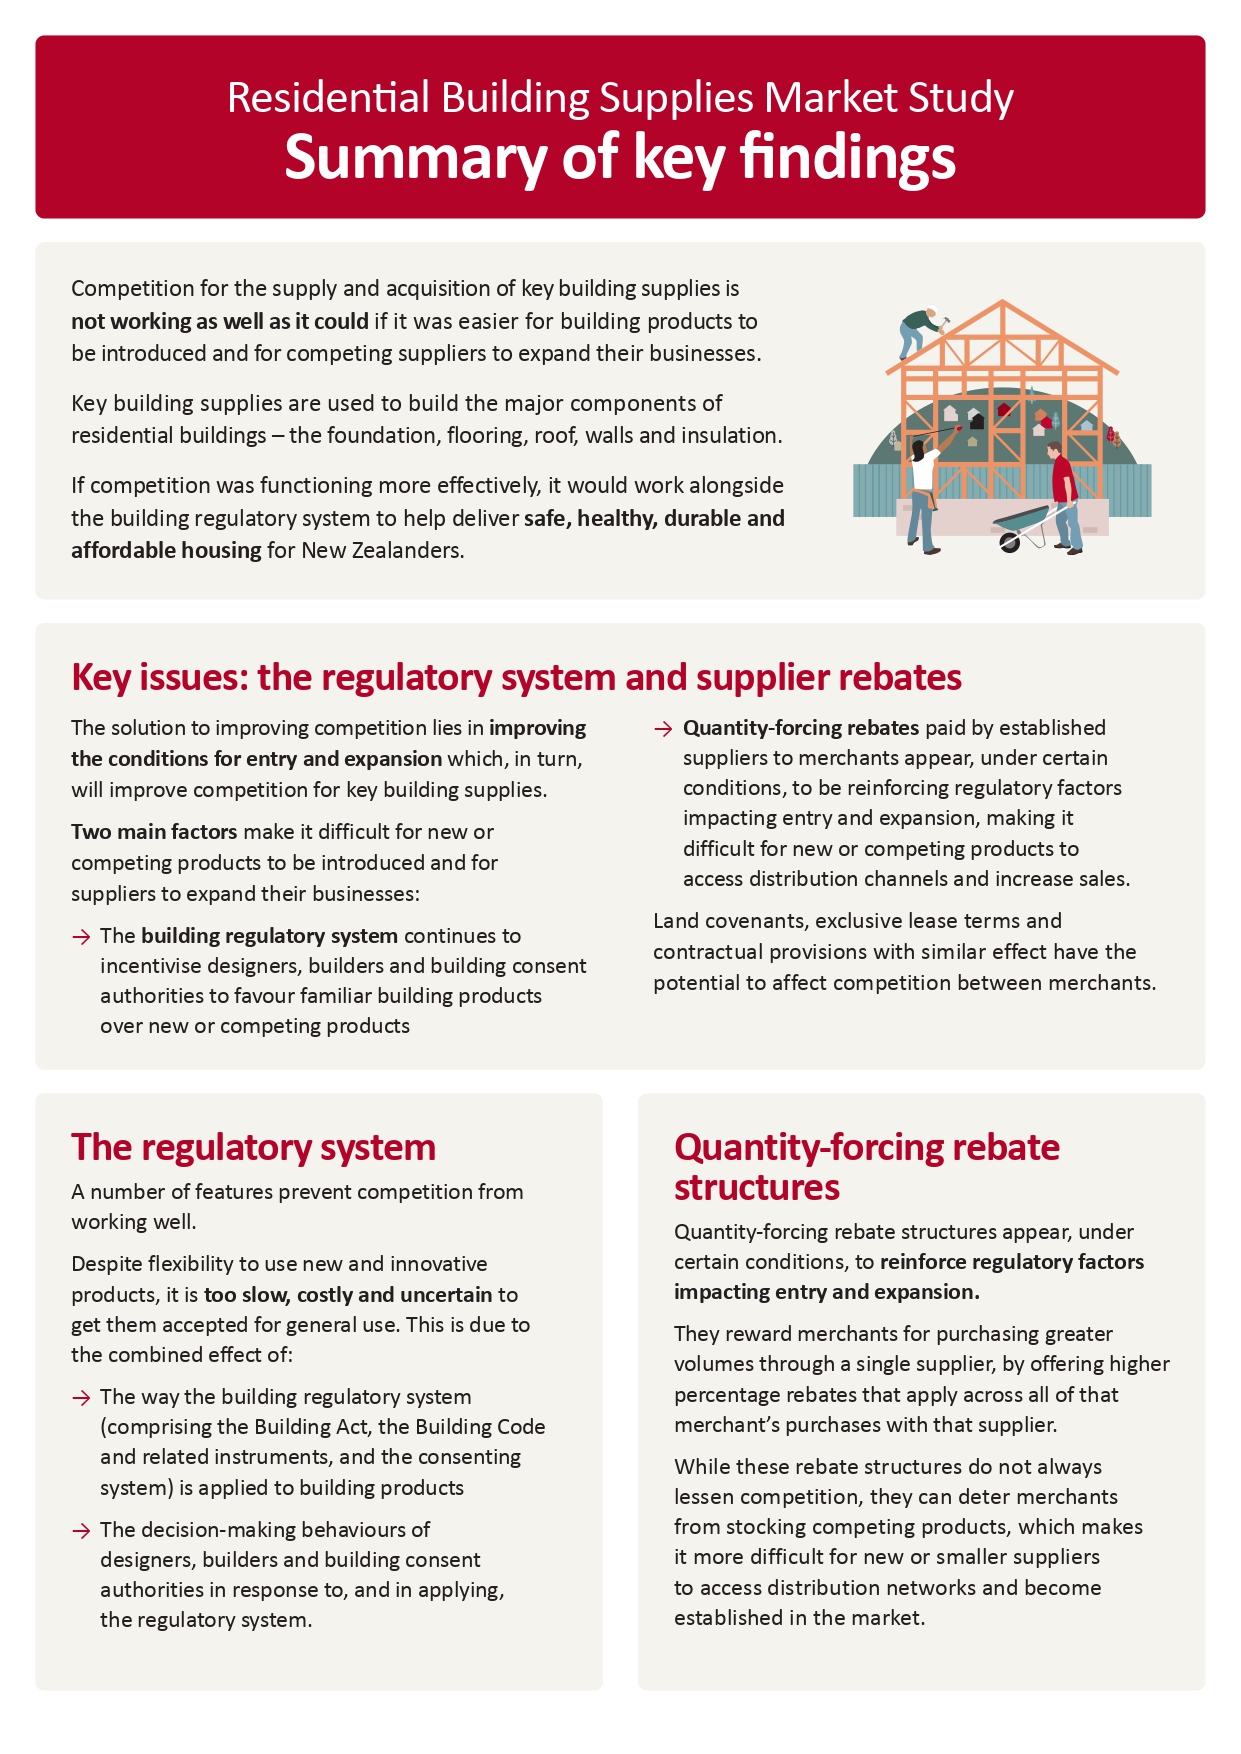 Residential building supplies market study – Summary of key findings graphic